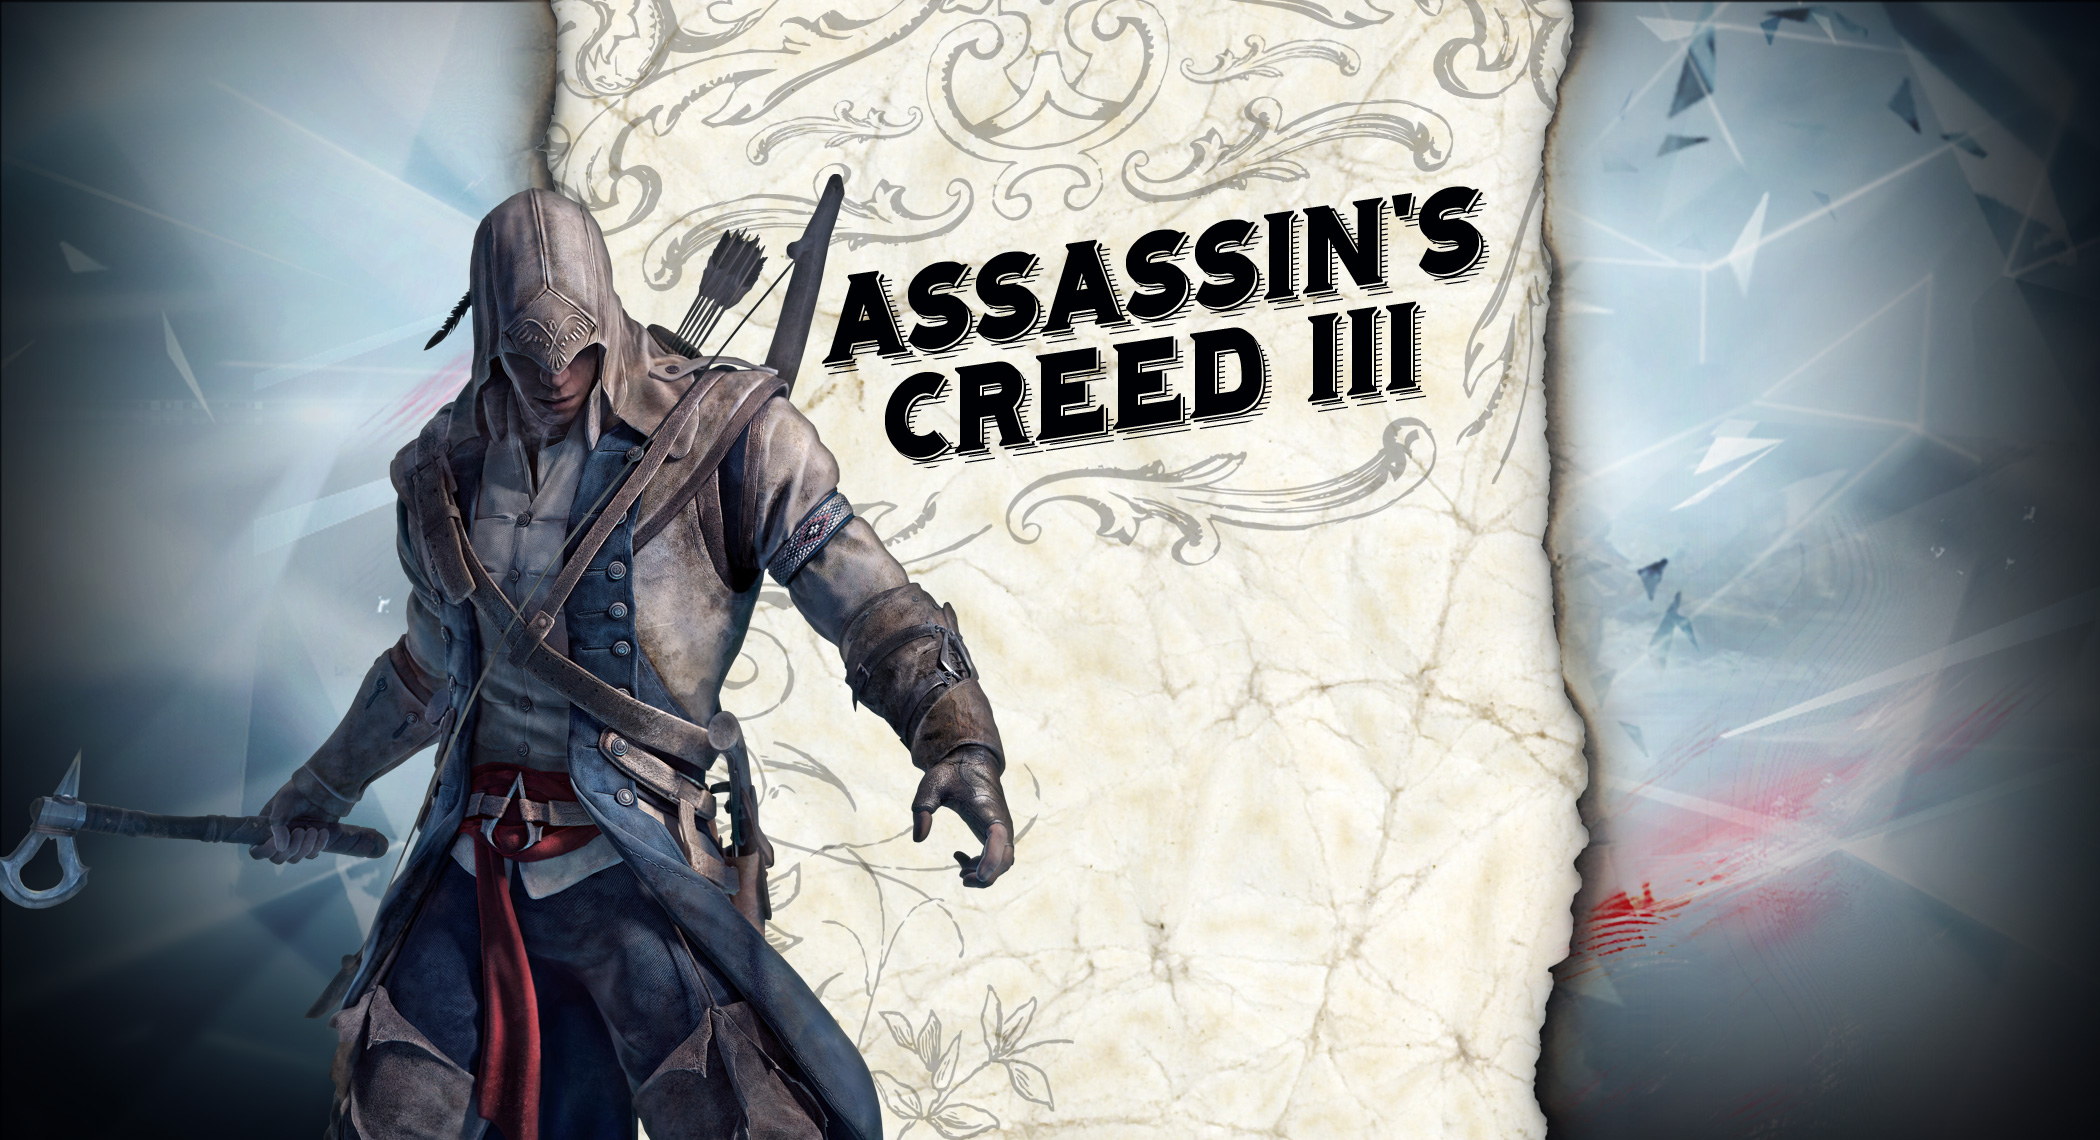 Video Game Assassins Creed Iii 2100x1140